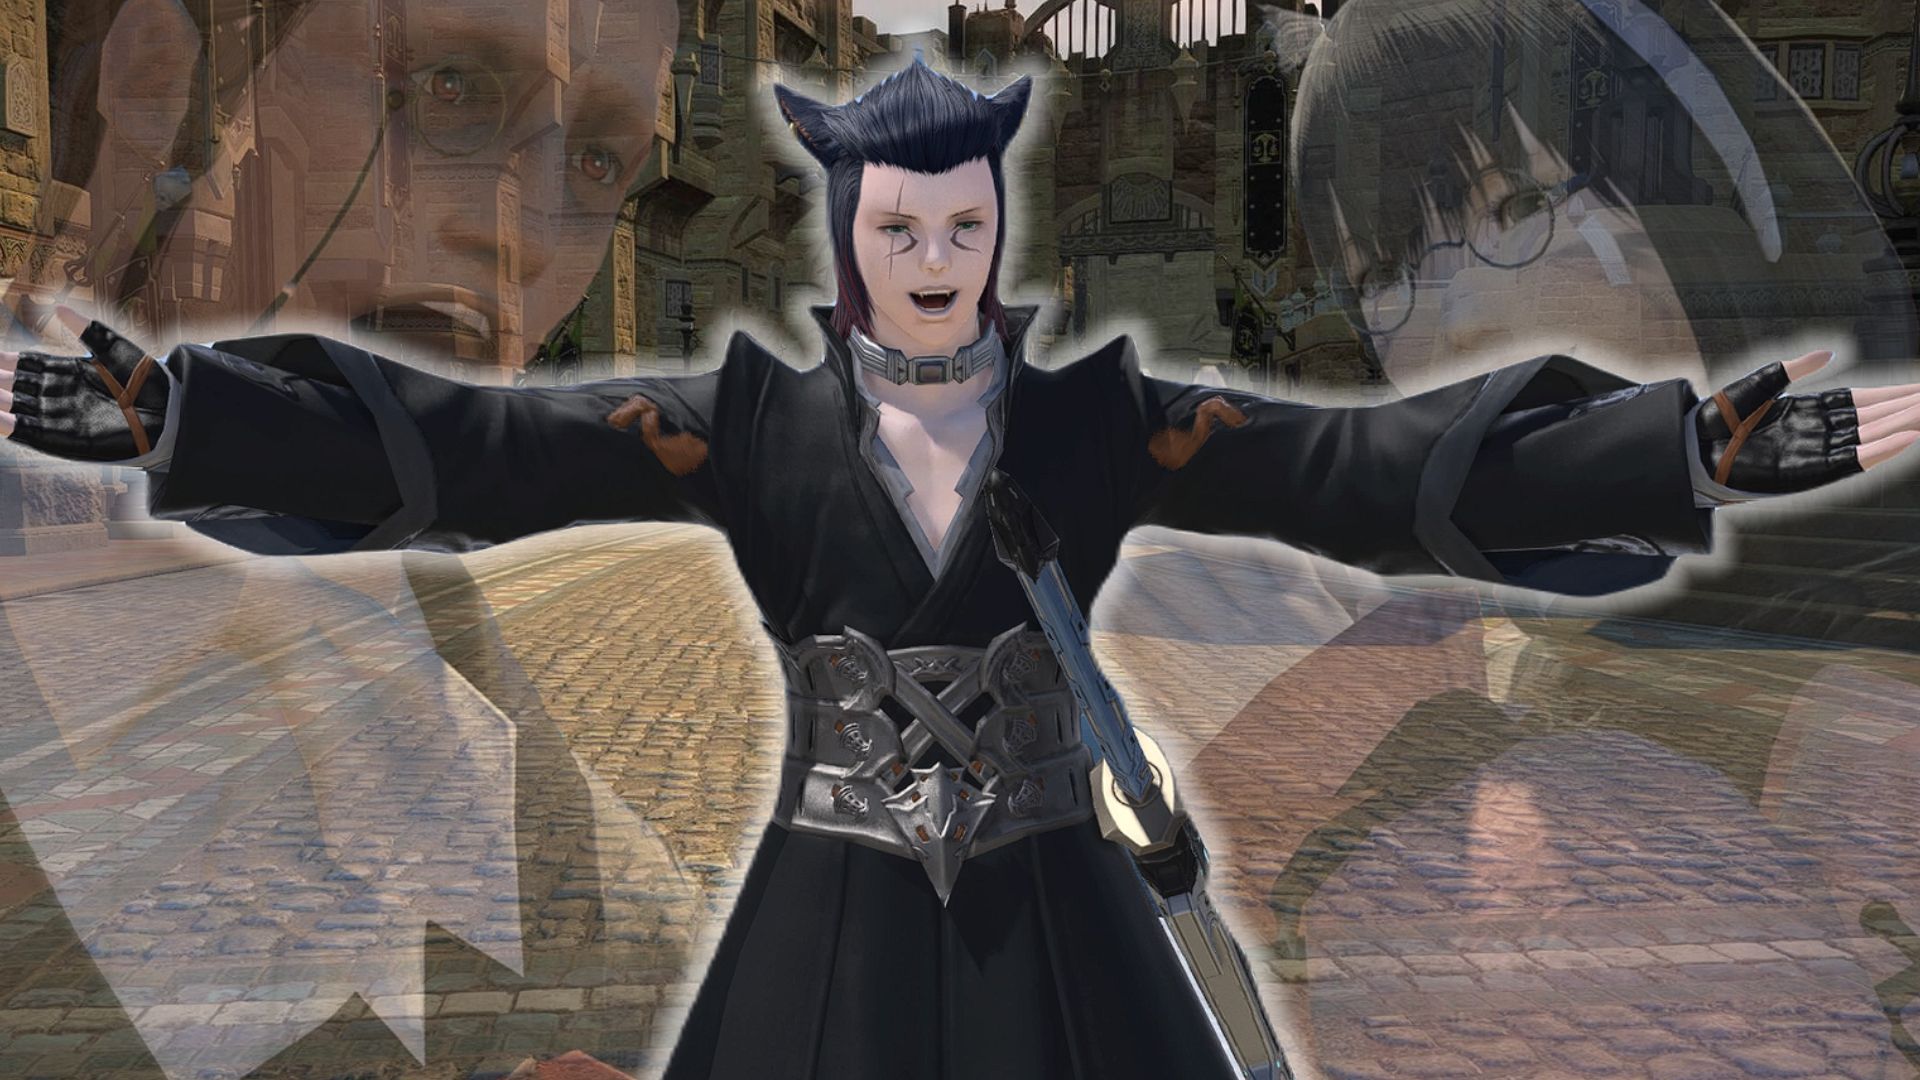 Final Fantasy 14 has its hooks in me, and I hate MMORPGs